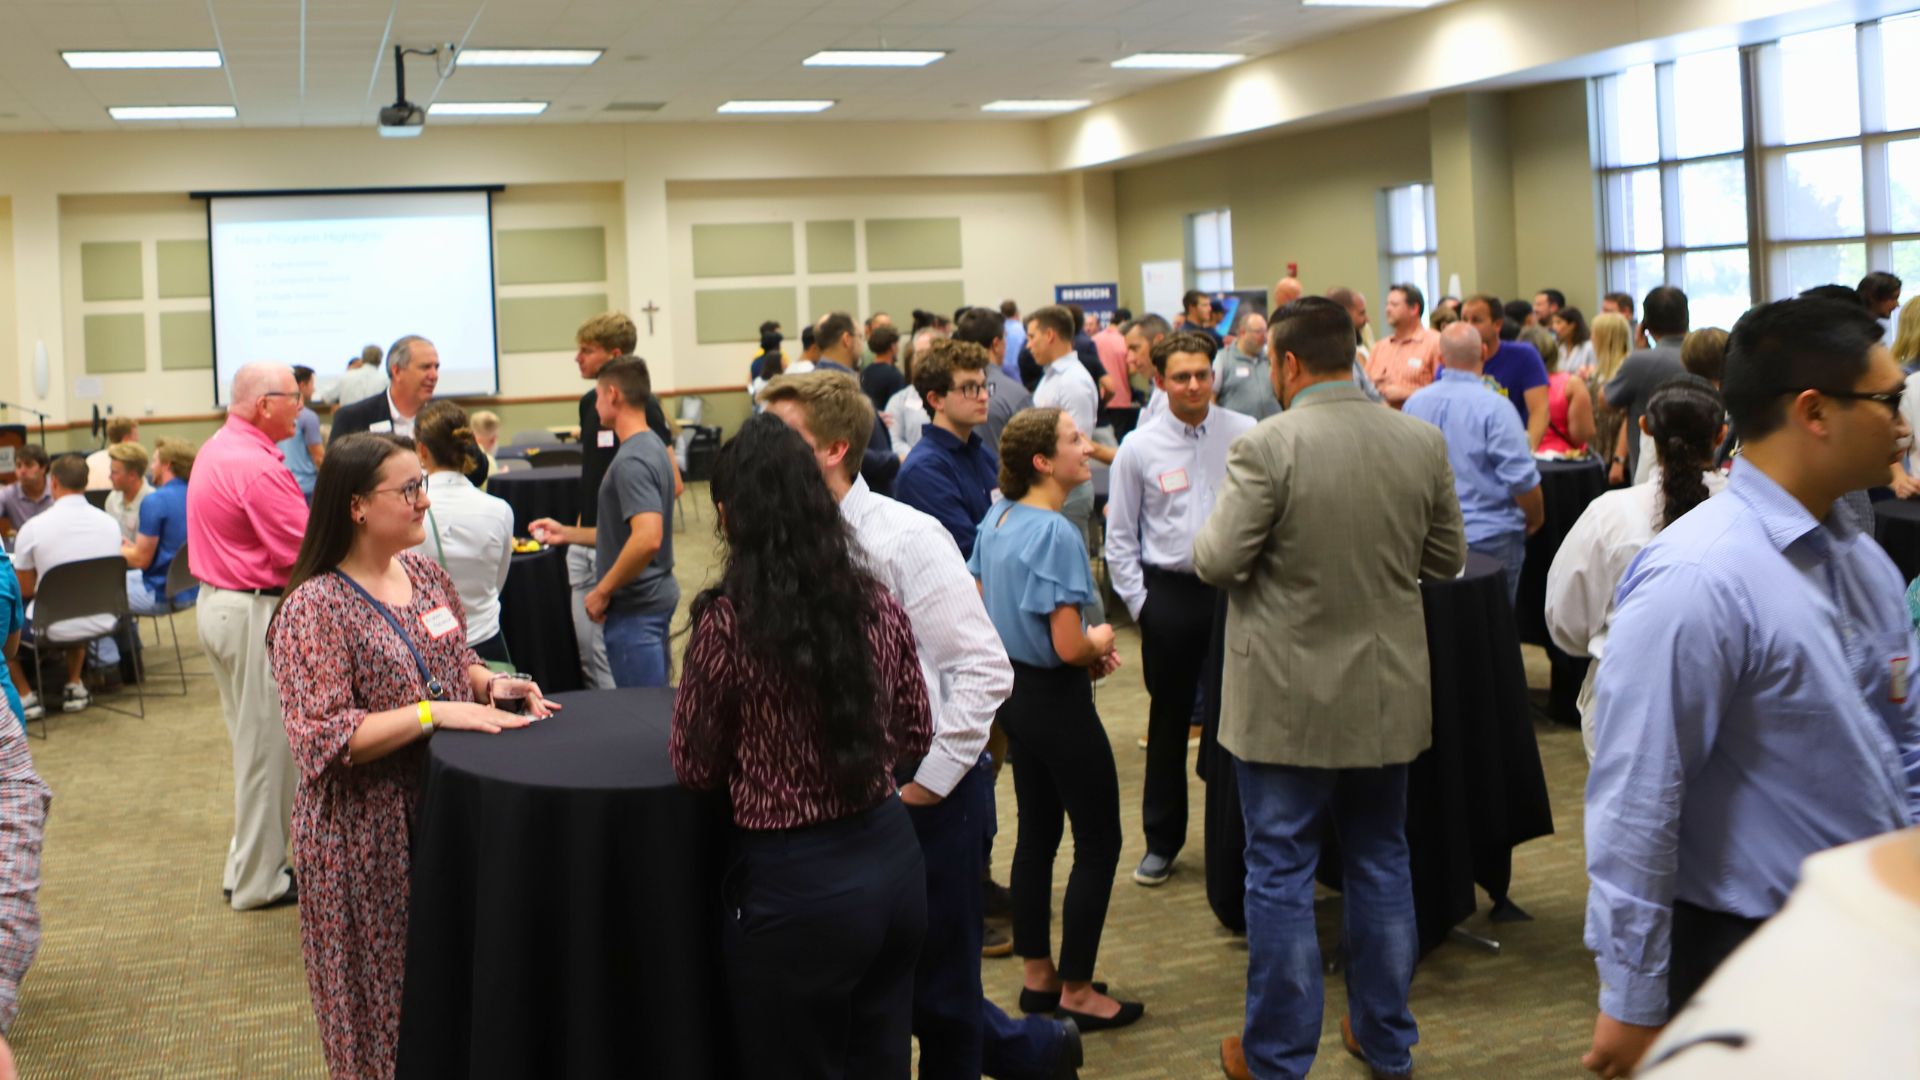 Students and employers network during an event at Newman University.